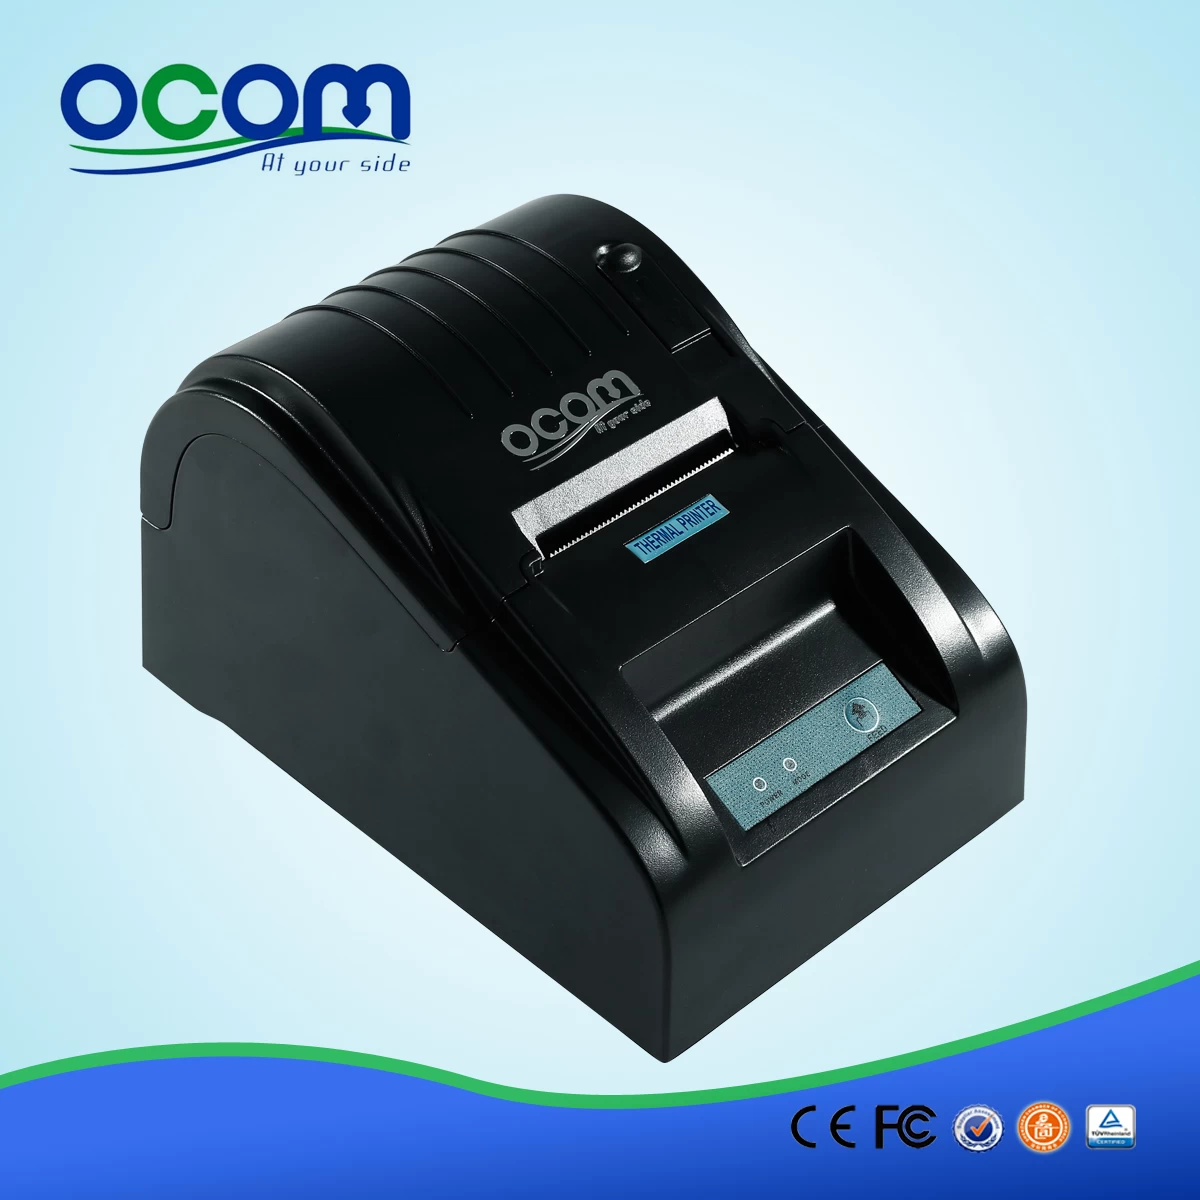 2' inch USB/ RS232 Android Thermal Receipt Printer (OCPP-585)